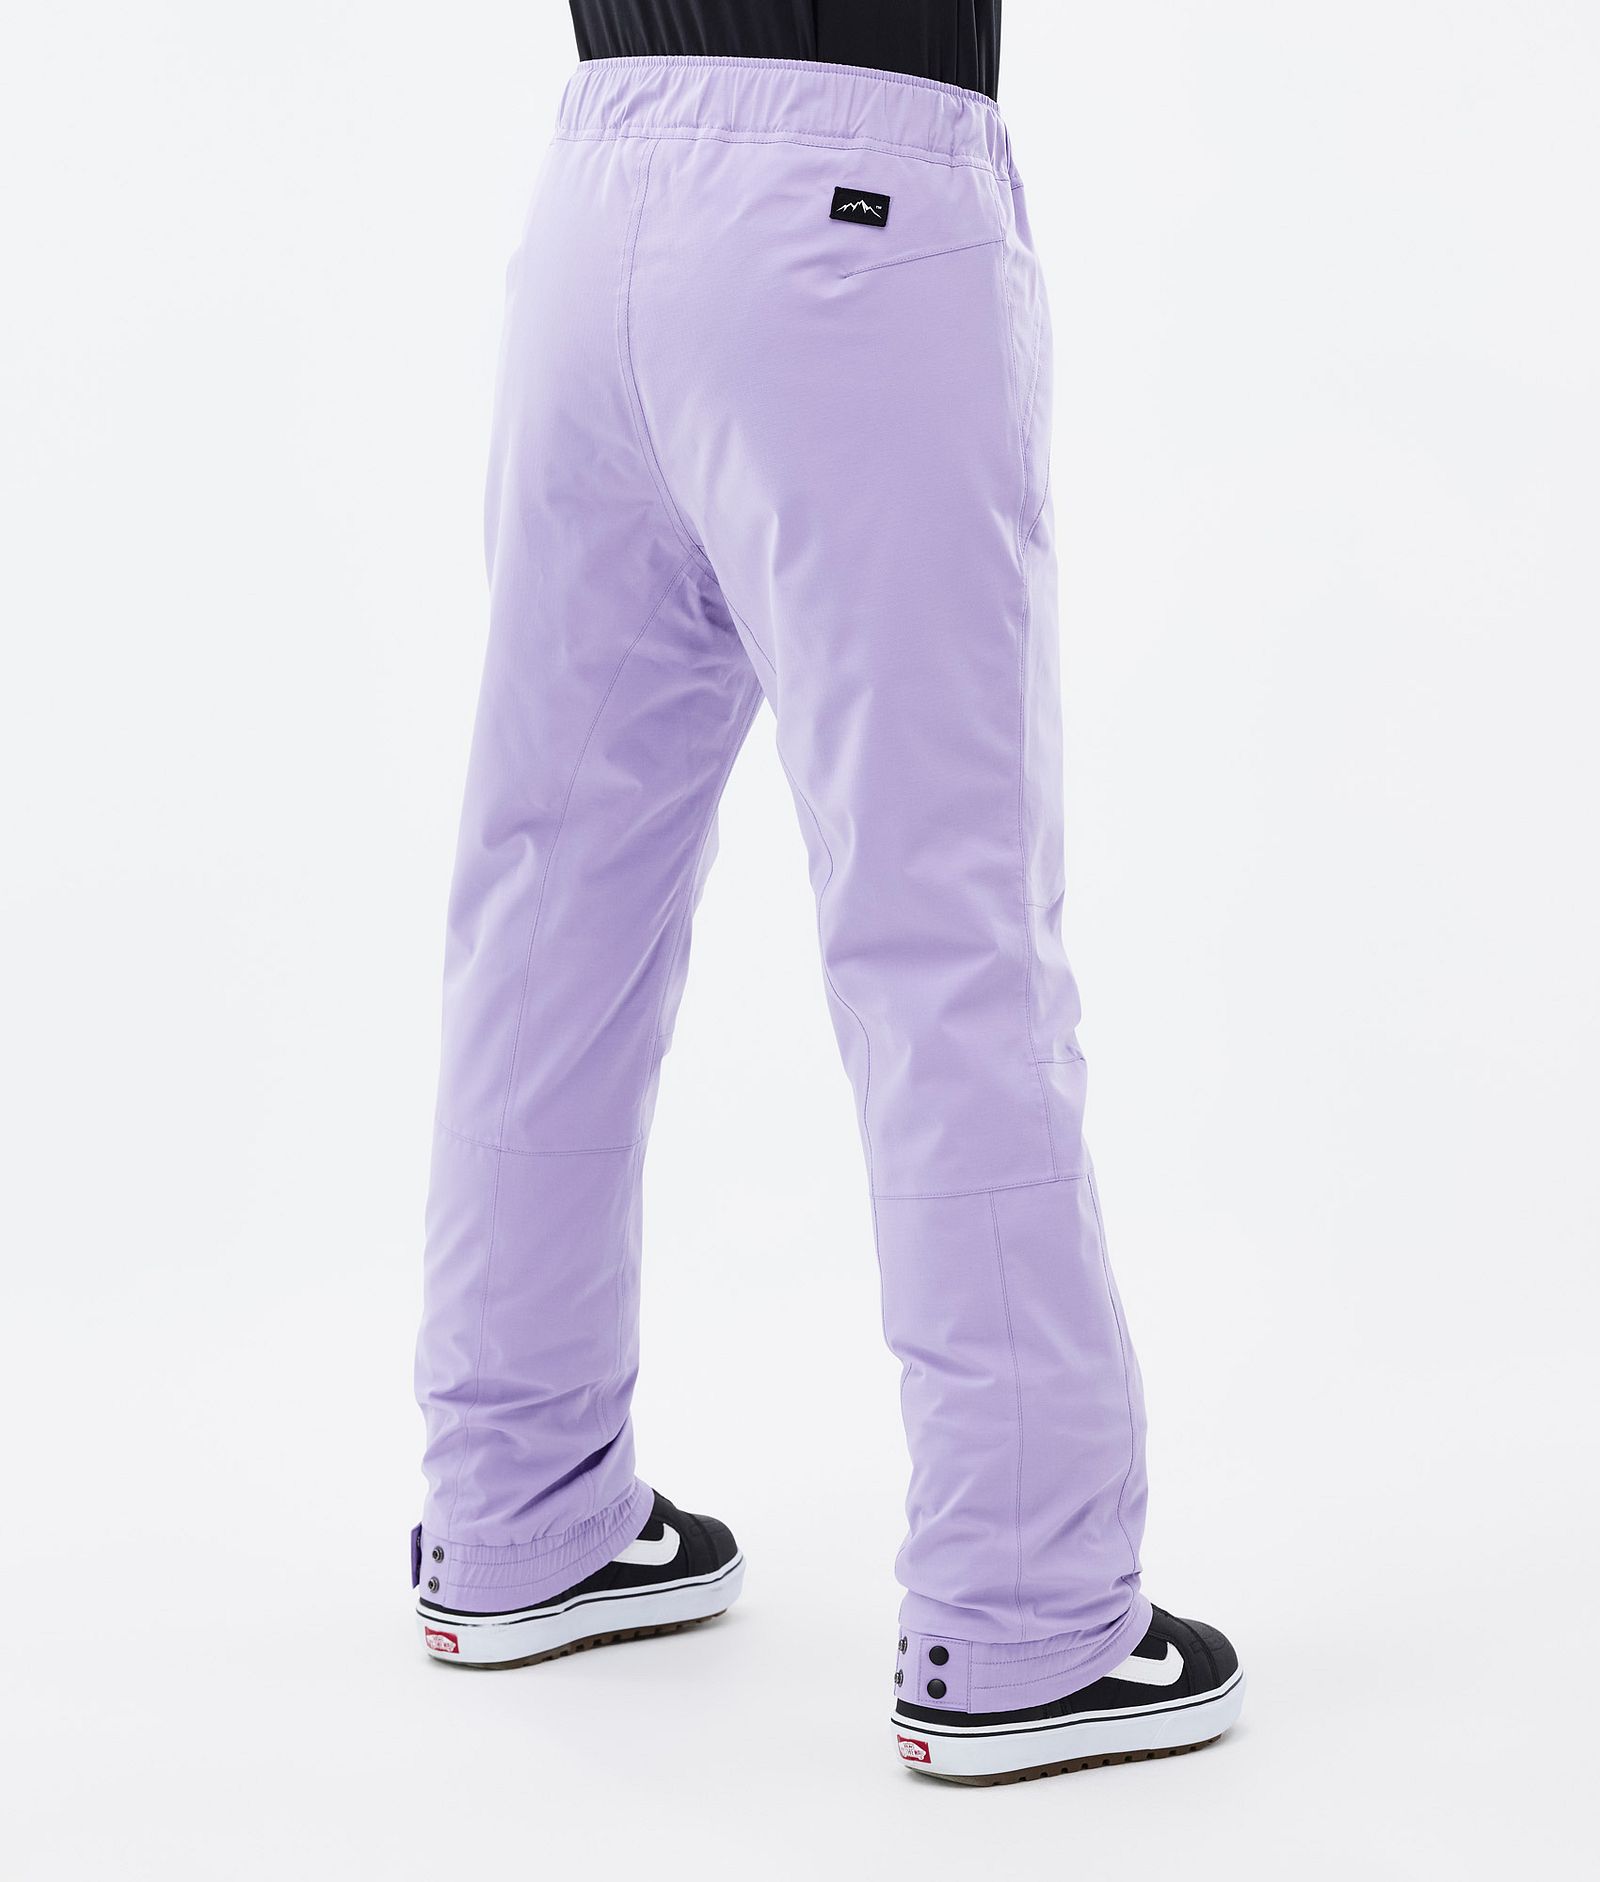 Blizzard W 2022 Snowboard Pants Women Faded Violet, Image 3 of 4